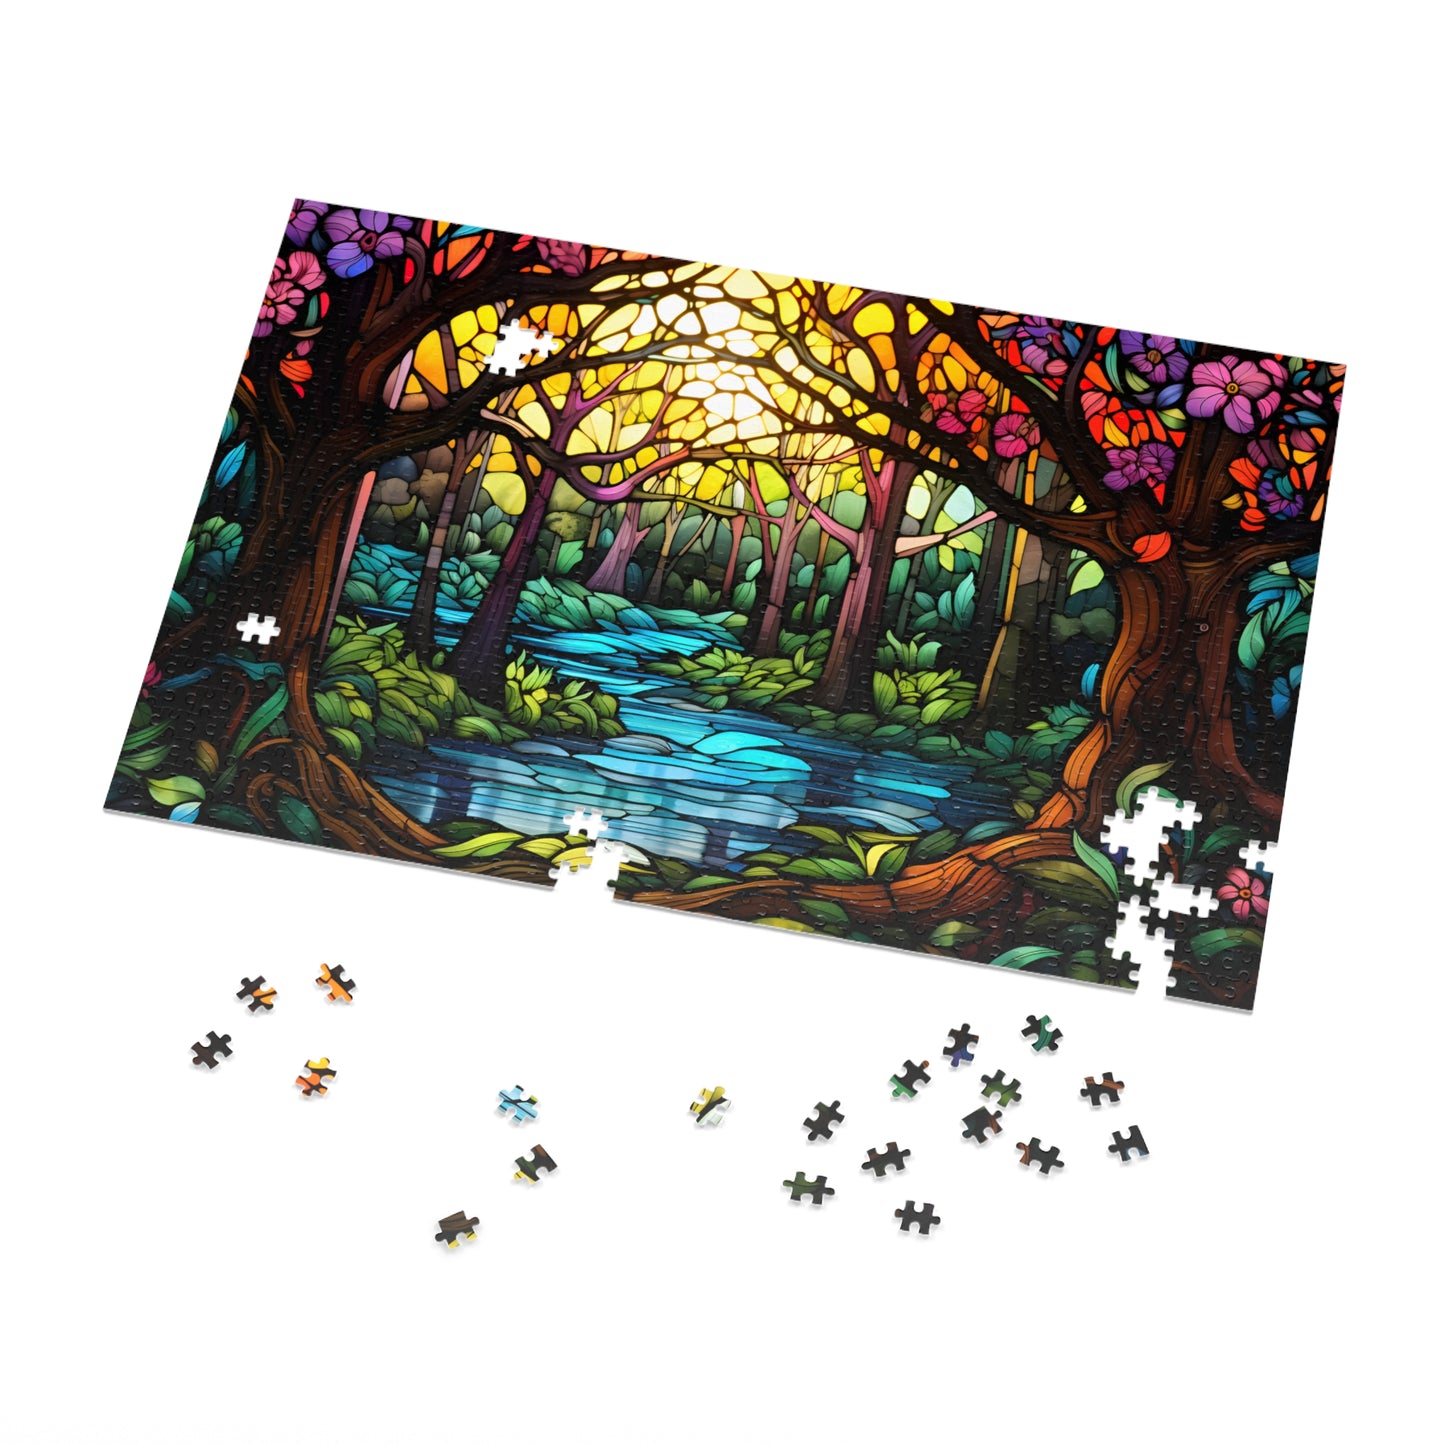 Stained Glass Enchanted Forrest Jigsaw Puzzle (500 or 1000-Piece)